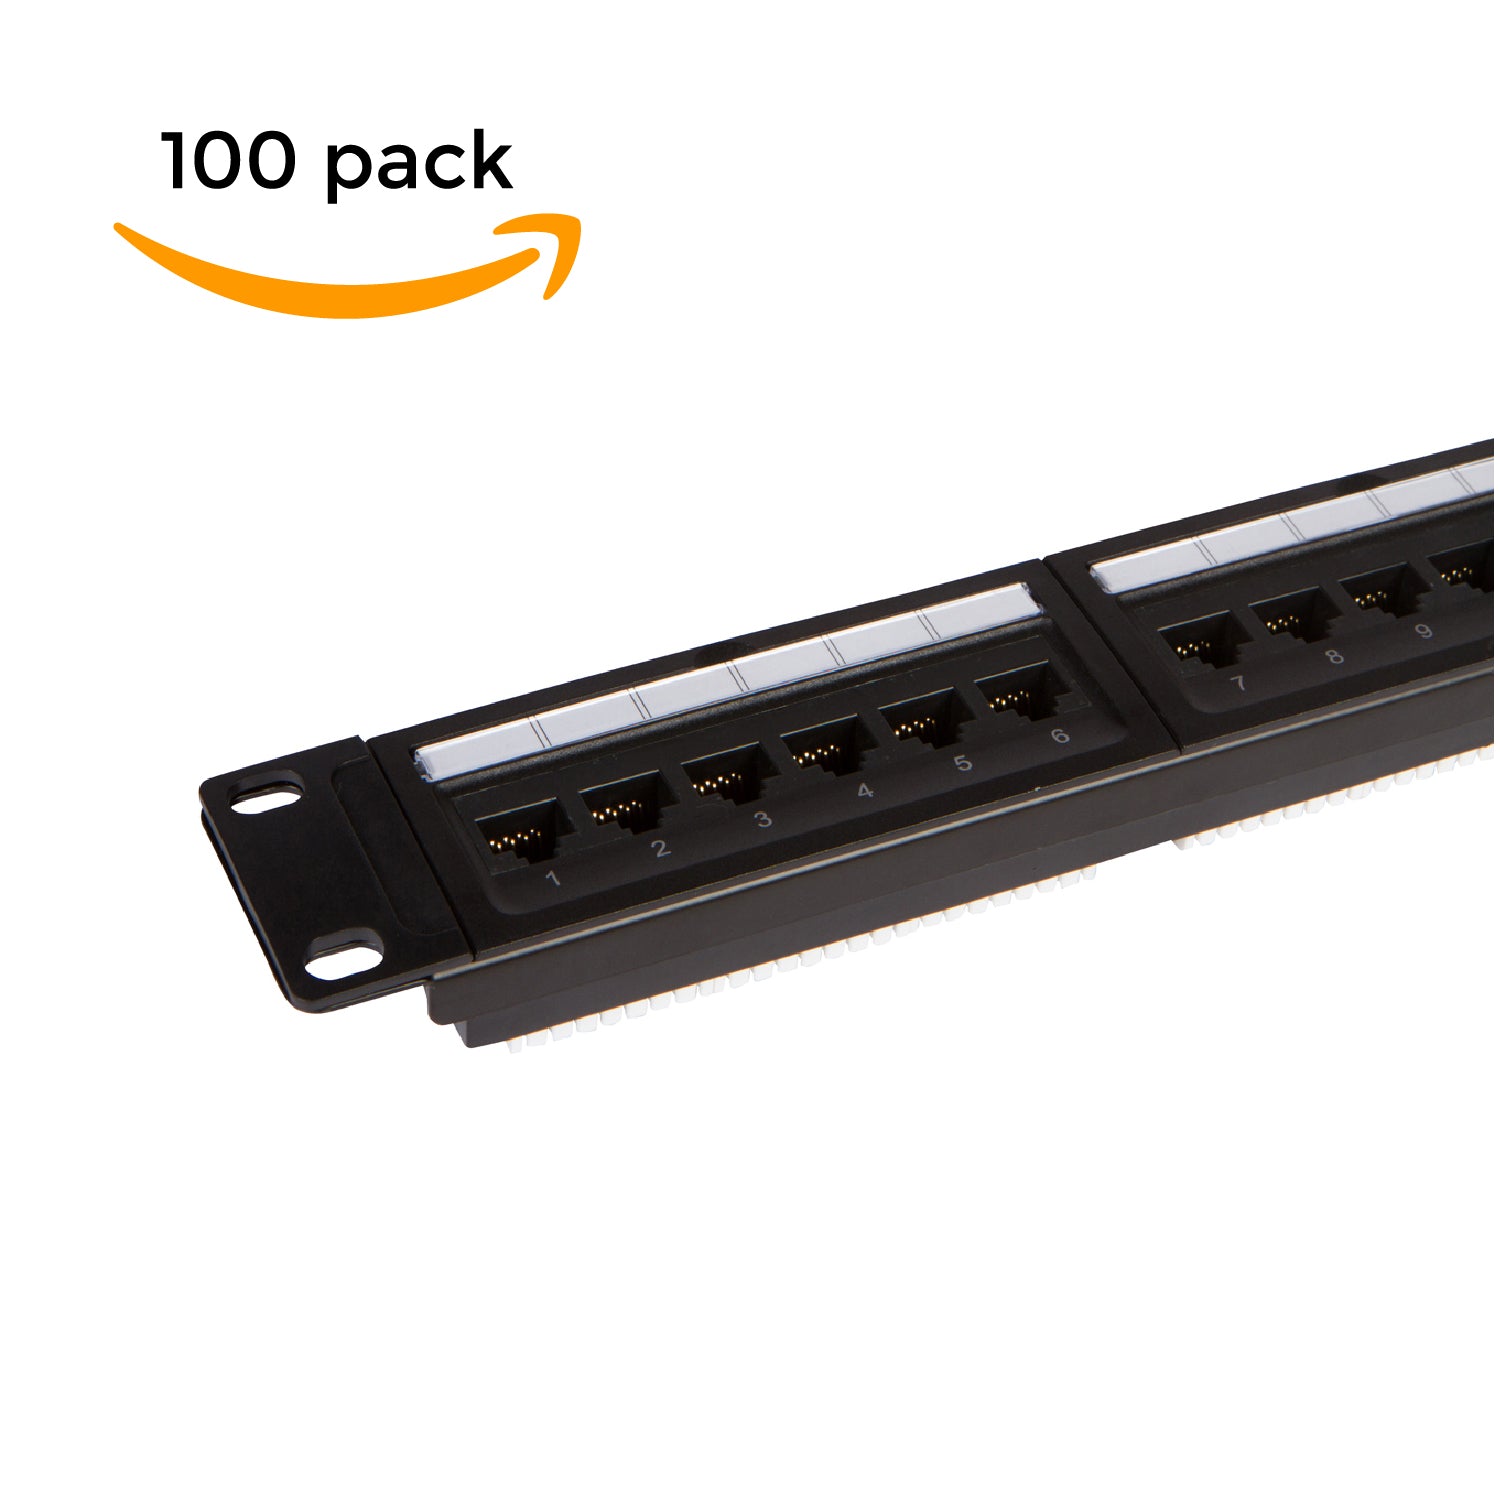 24 Port Cat6 Patch Panel with Punch Down Tool and Cable Management System (1, 24 Port) - Milena International Inc